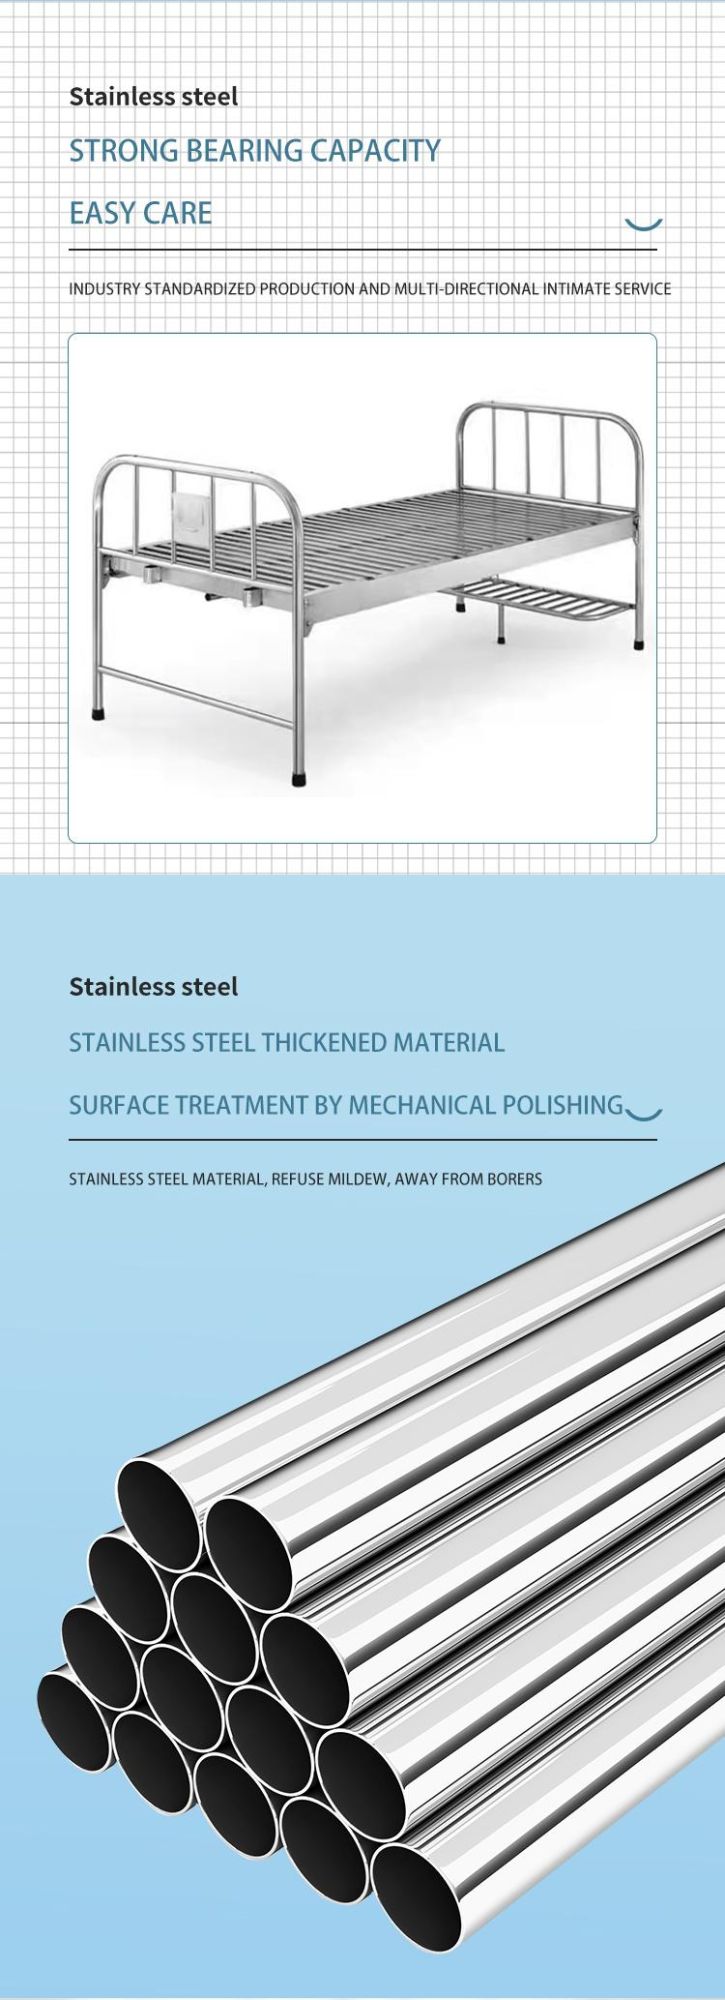 Hot-Sale Product Manual Sickbed (stainless steel headband double rocker)